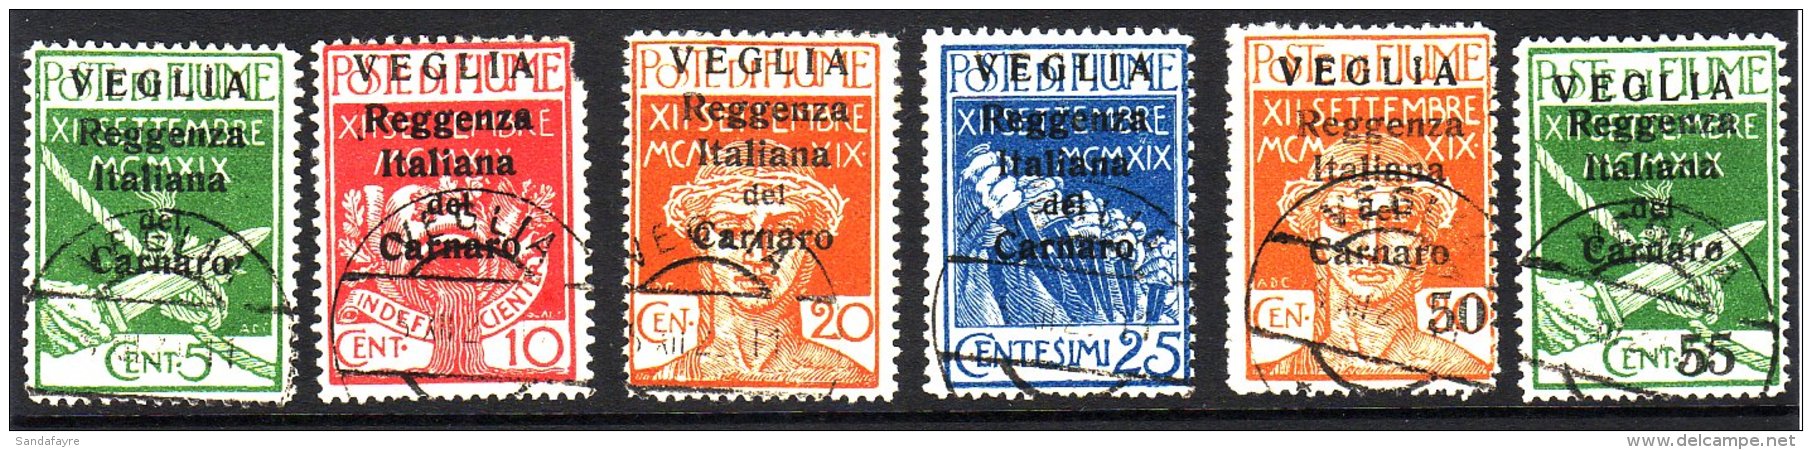 VEGLIA 1920 Small Overprint Set (Sass S. 54, SG 1B/6) Fine Used, The 10c With A Damaged Corner. (6 Stamps) For... - Fiume